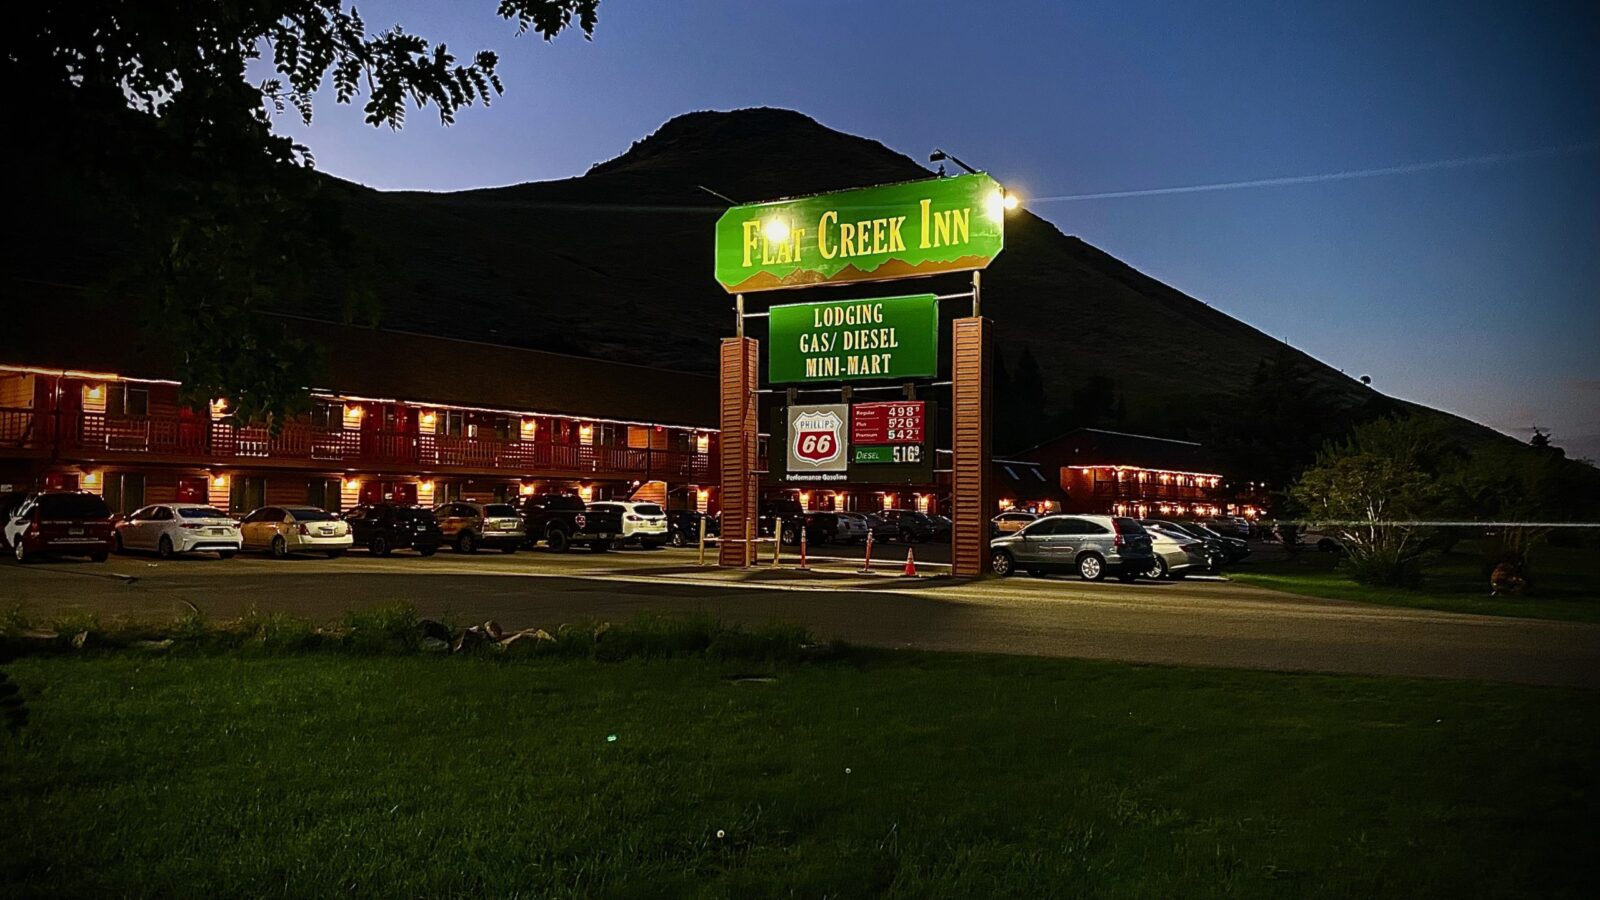 The Rise, Fall, and Rise of Jackson’s Favorite Family-Owned Motel